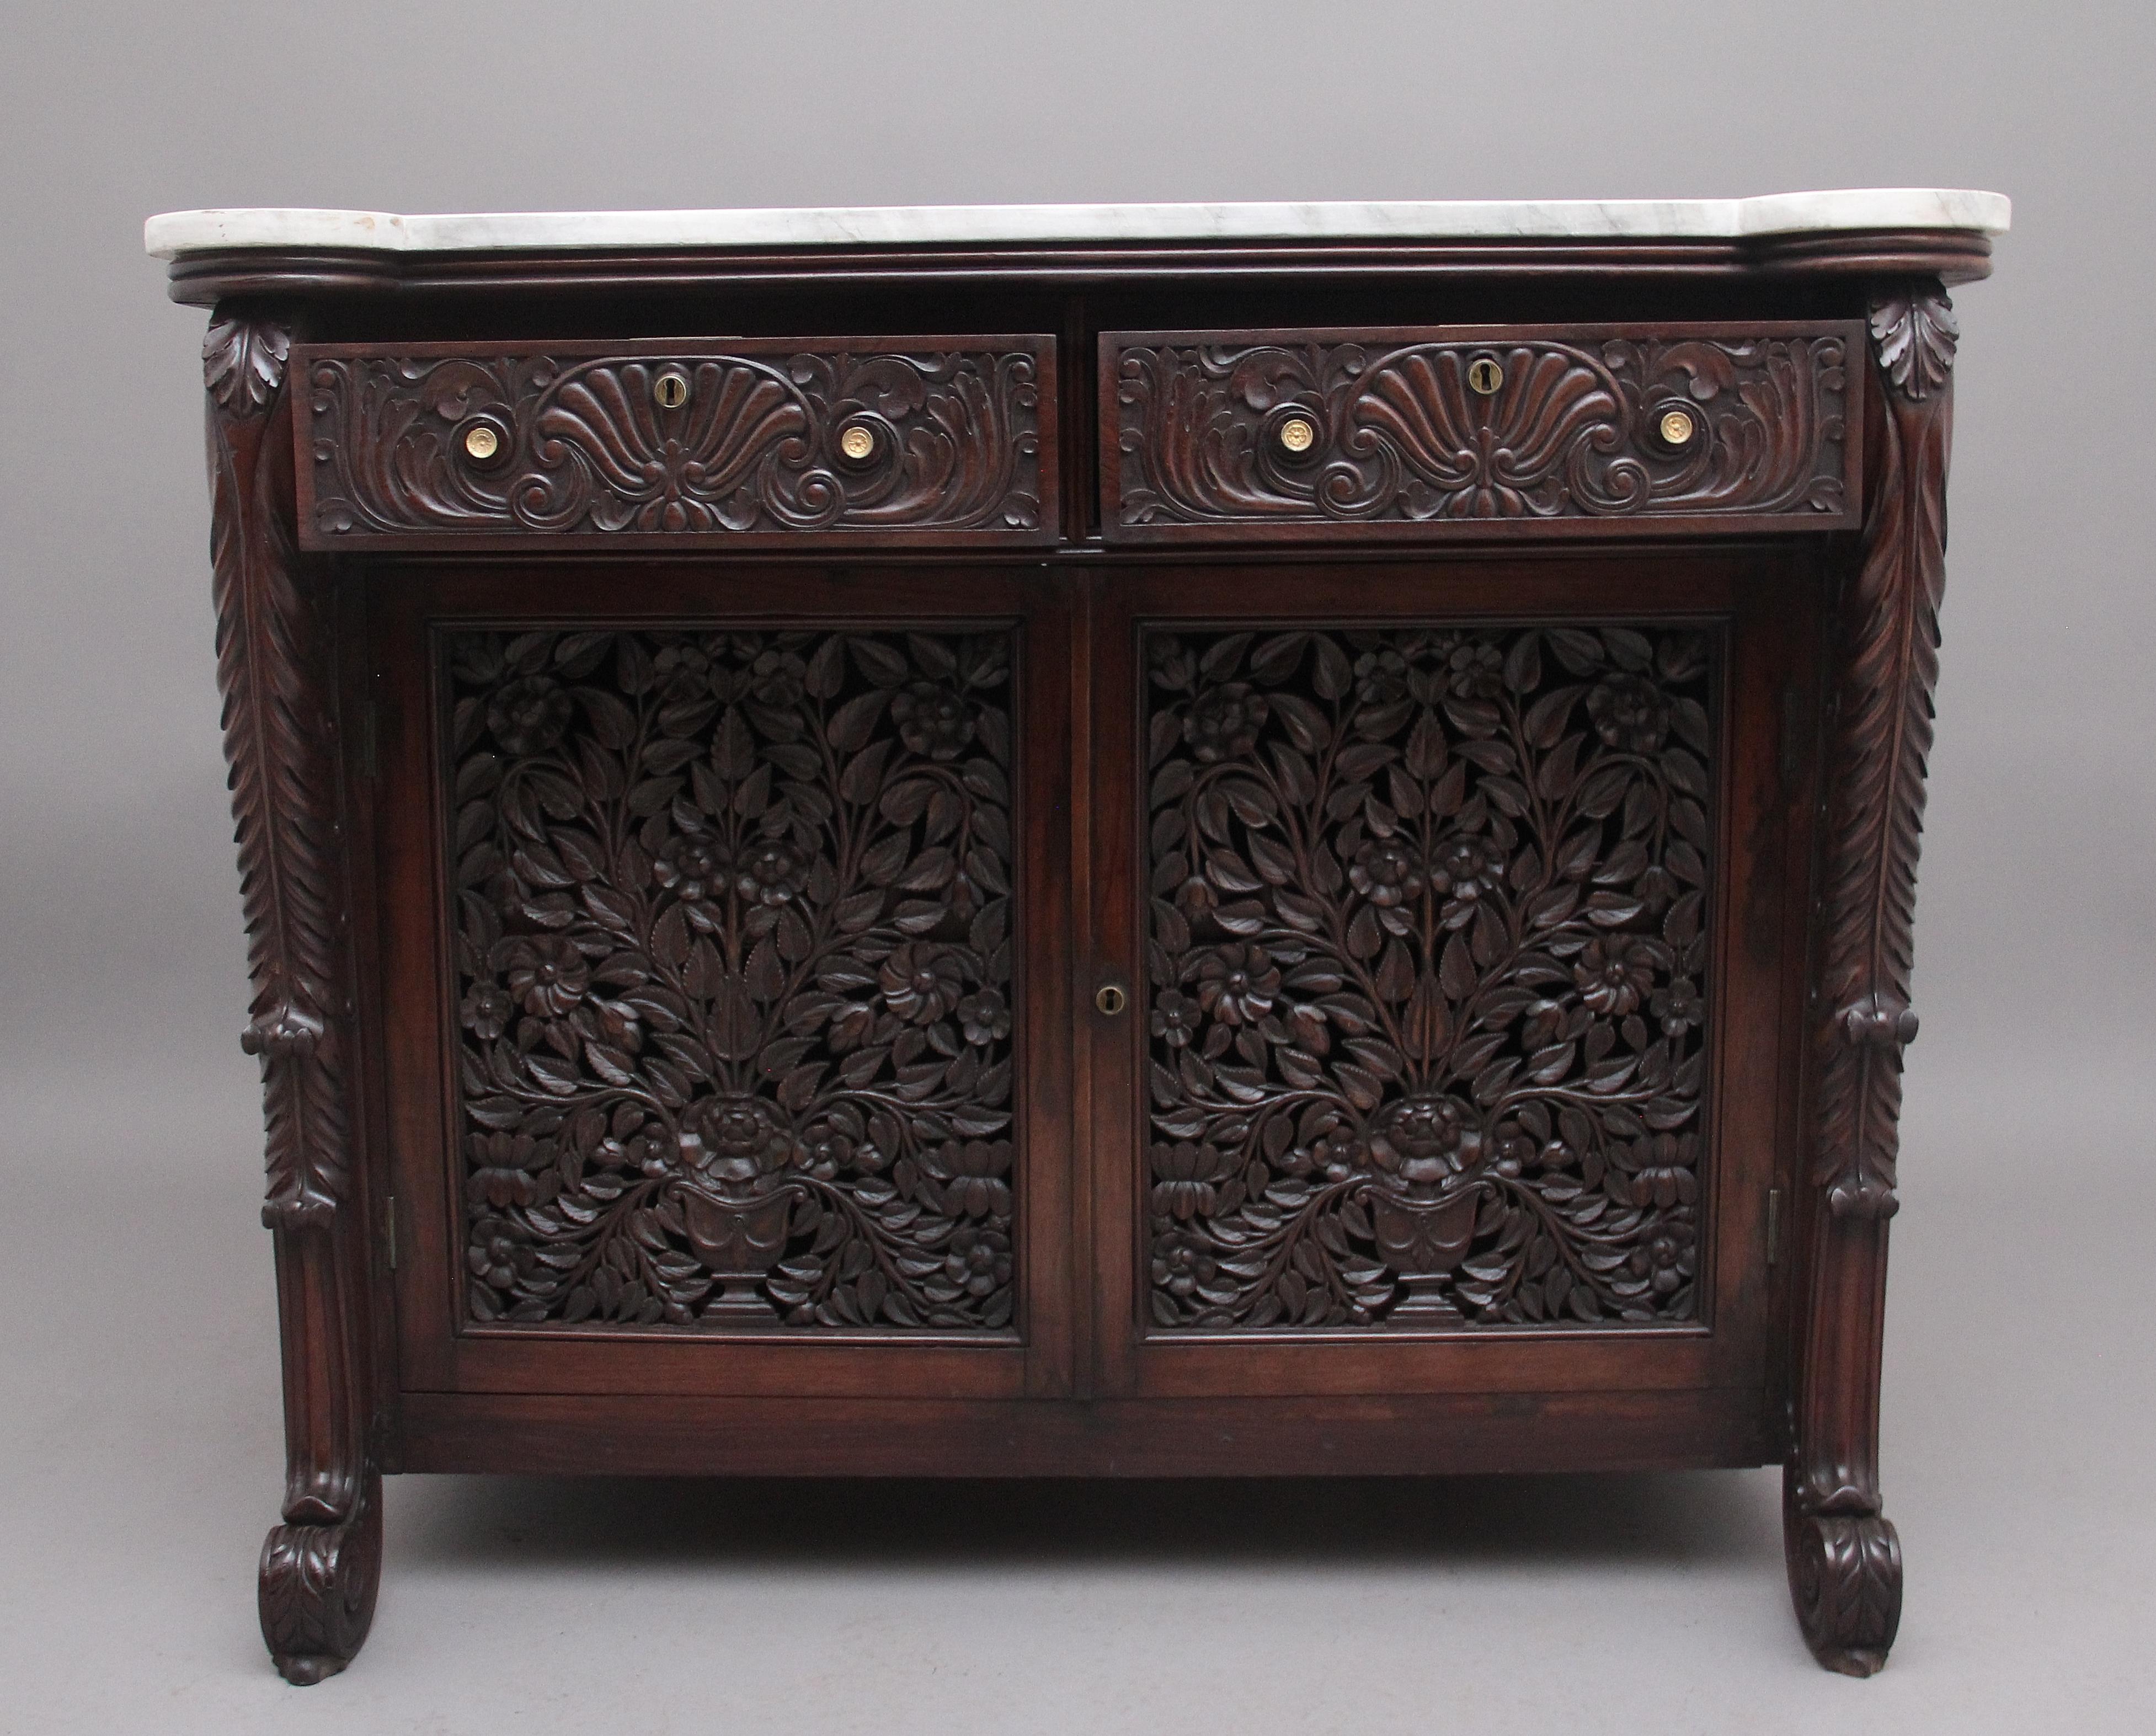 19th century carved Anglo Indian cabinet, having the original white veined shaped marble top above two frieze drawers with the original turned brass engraved handles, the drawer fronts having carved floral and shell decoration, two hinged cupboard